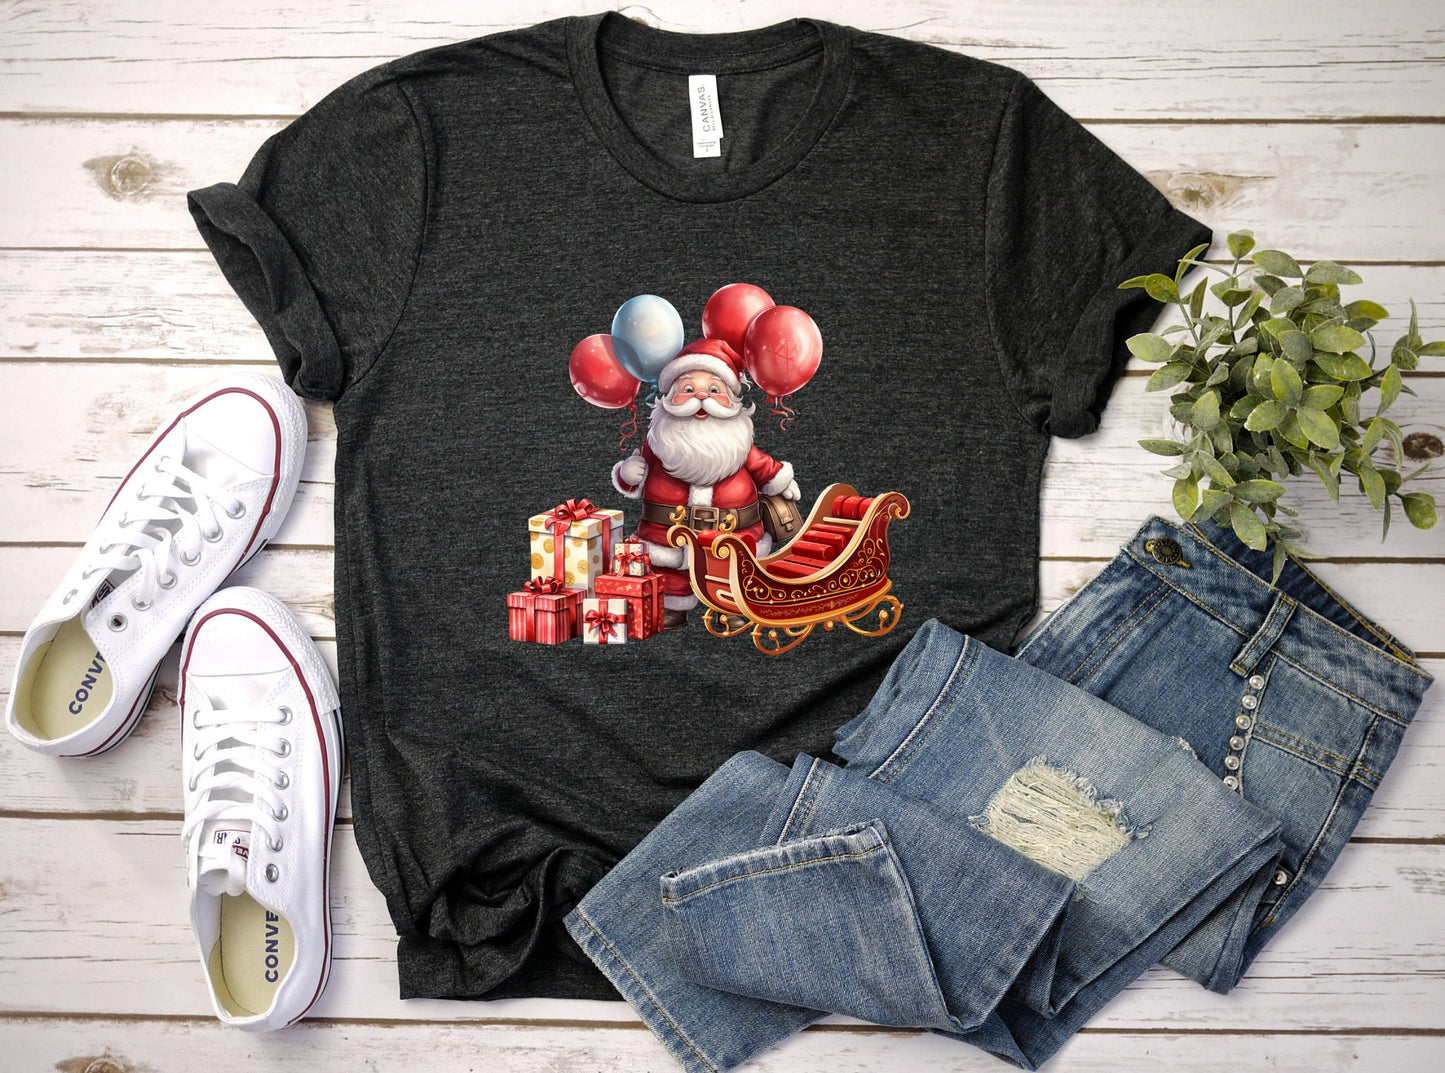 The Santas Sleigh with Presents T-Shirt. Makes the Perfect Gift for Friends, Family, Coworkers or yourself.  Check Out My Shop for even more Fun Designs.
www.scorpiontees.etsy.com